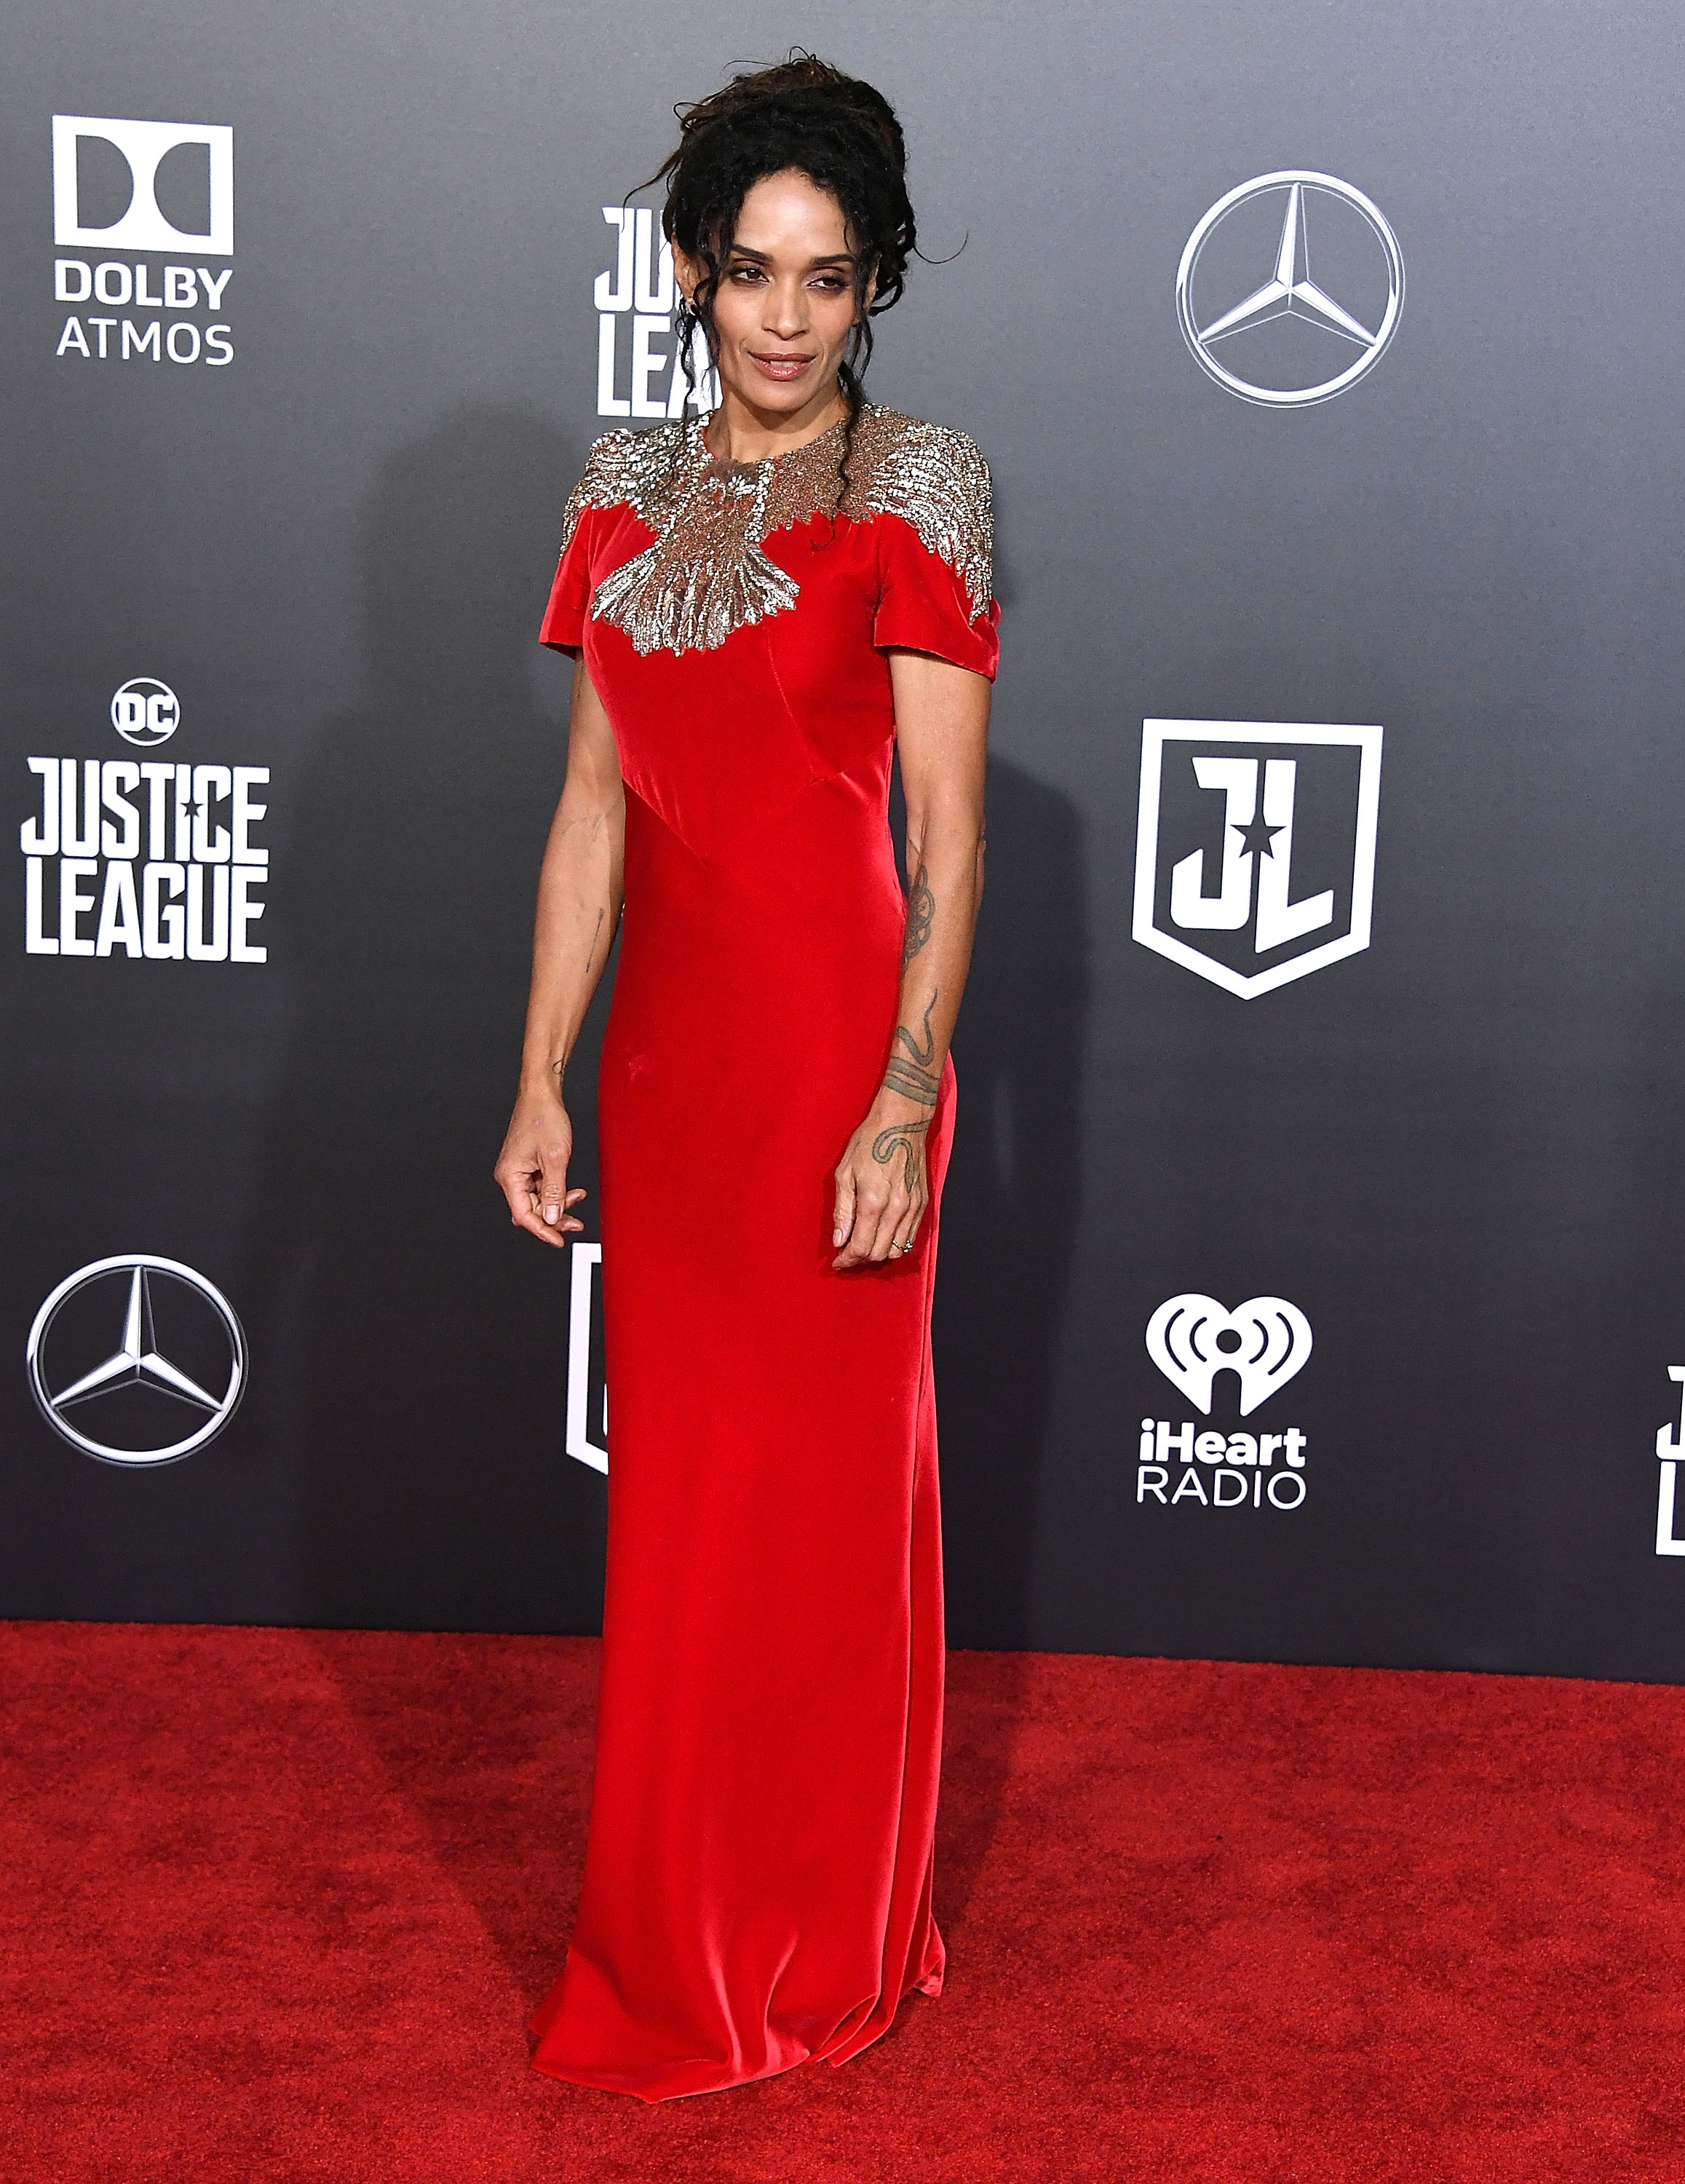 Premiere Of Warner Bros. Pictures' 'Justice League' - Arrivals